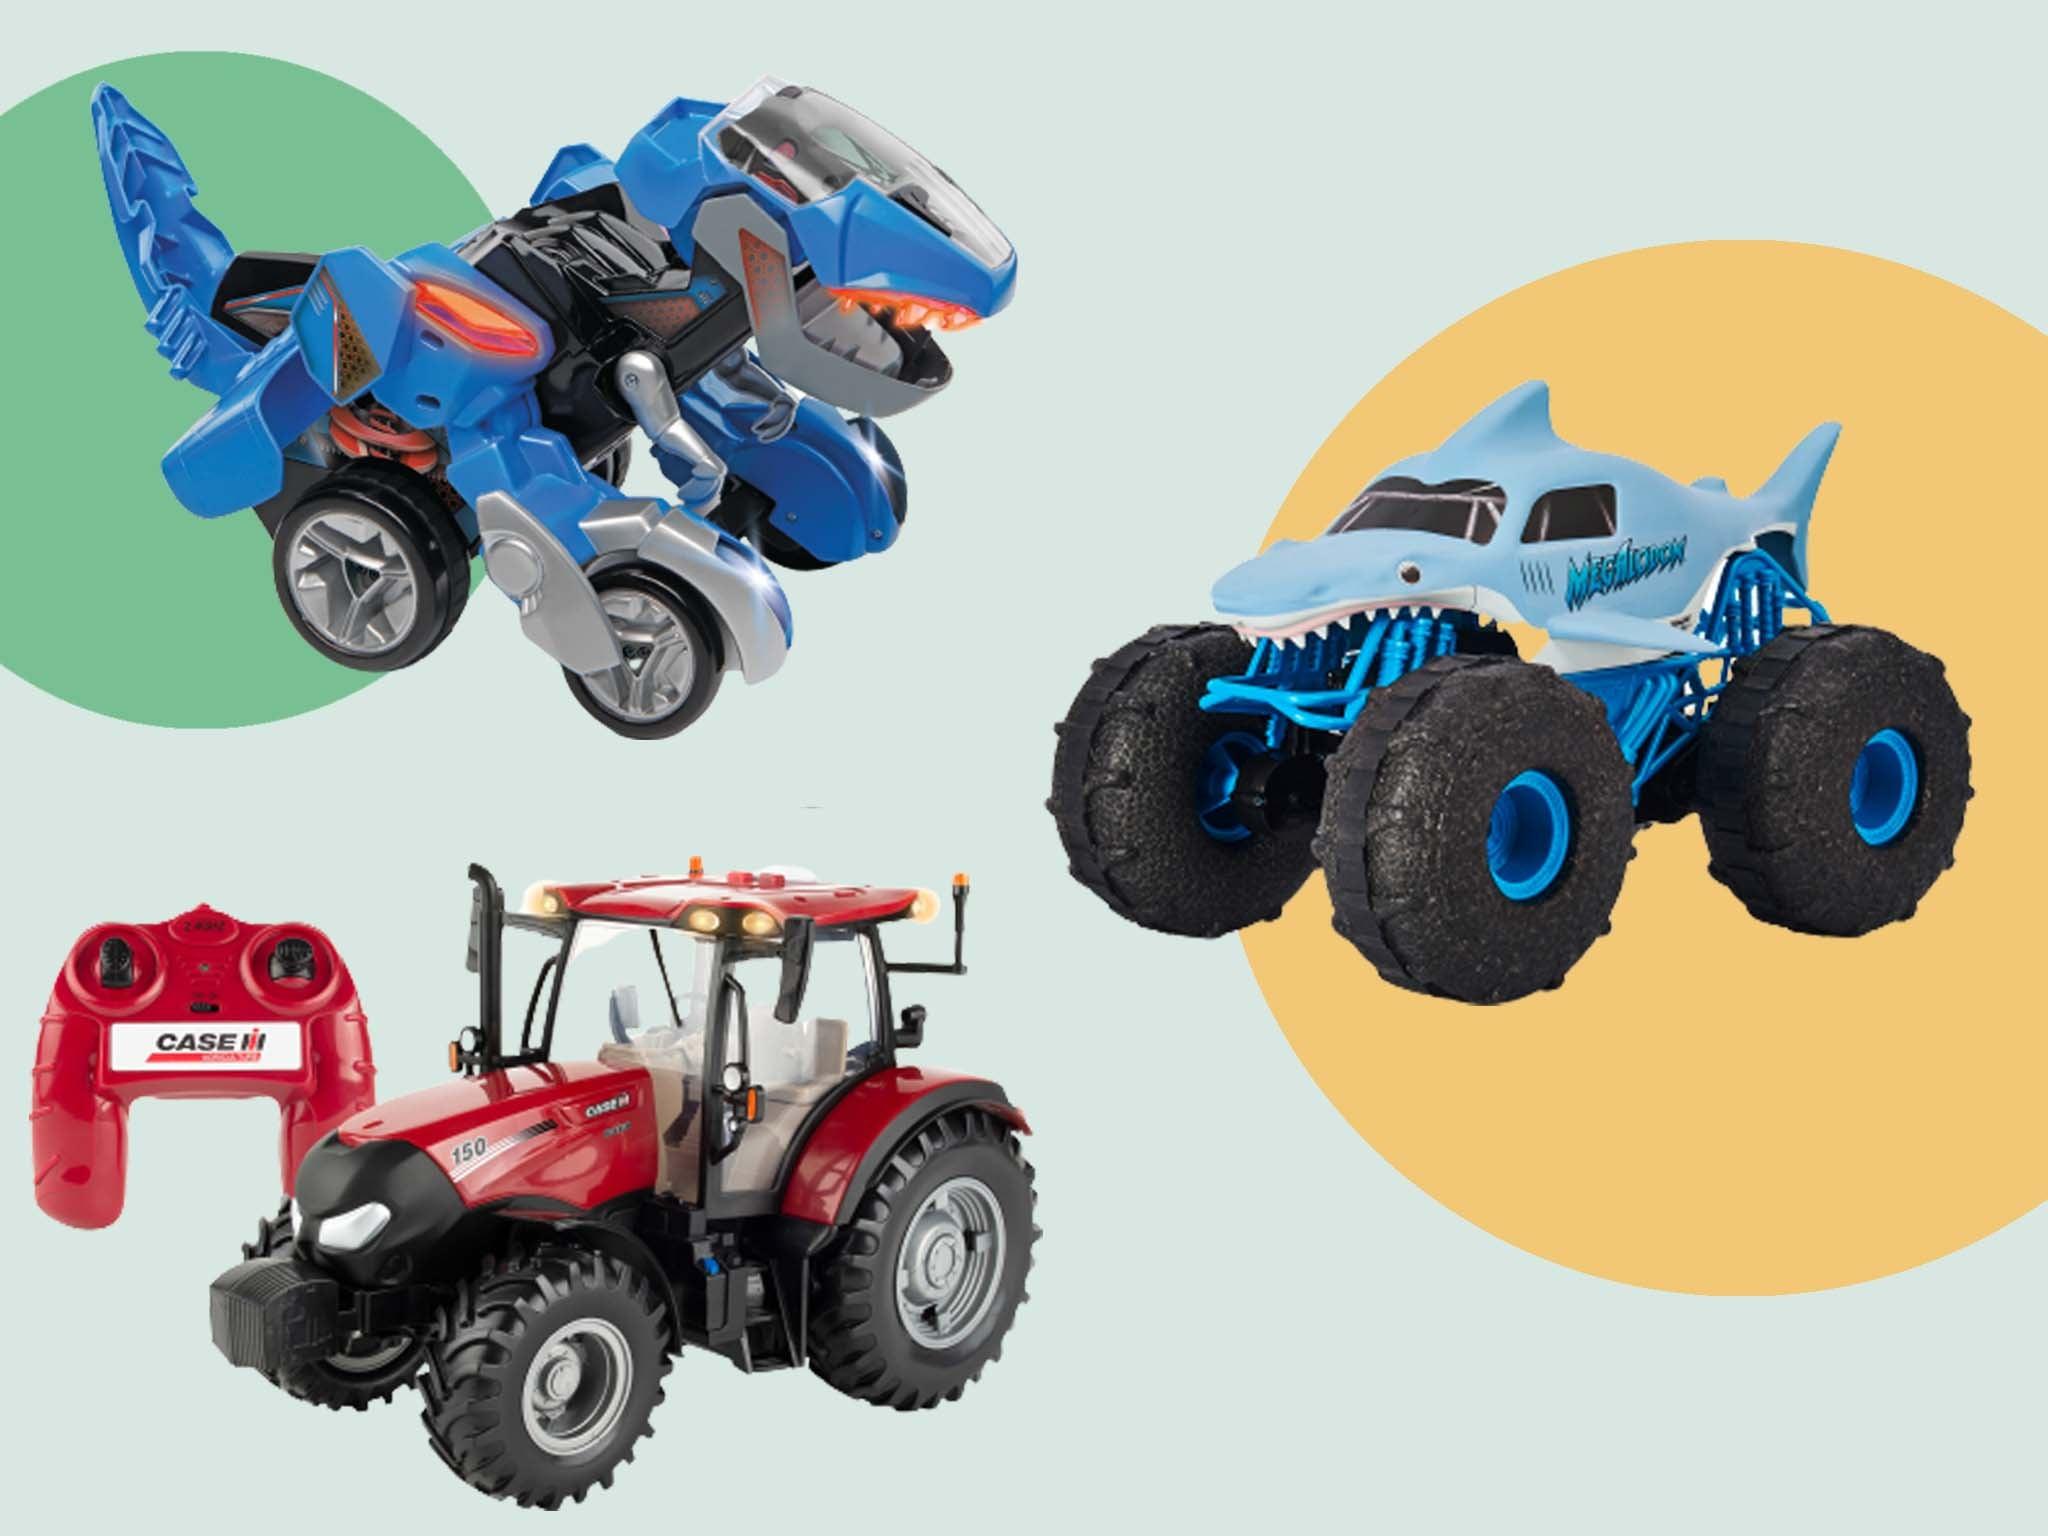 360 Rc Car: Durable, High-Quality, and User-Friendly RC Car for Endless Fun.